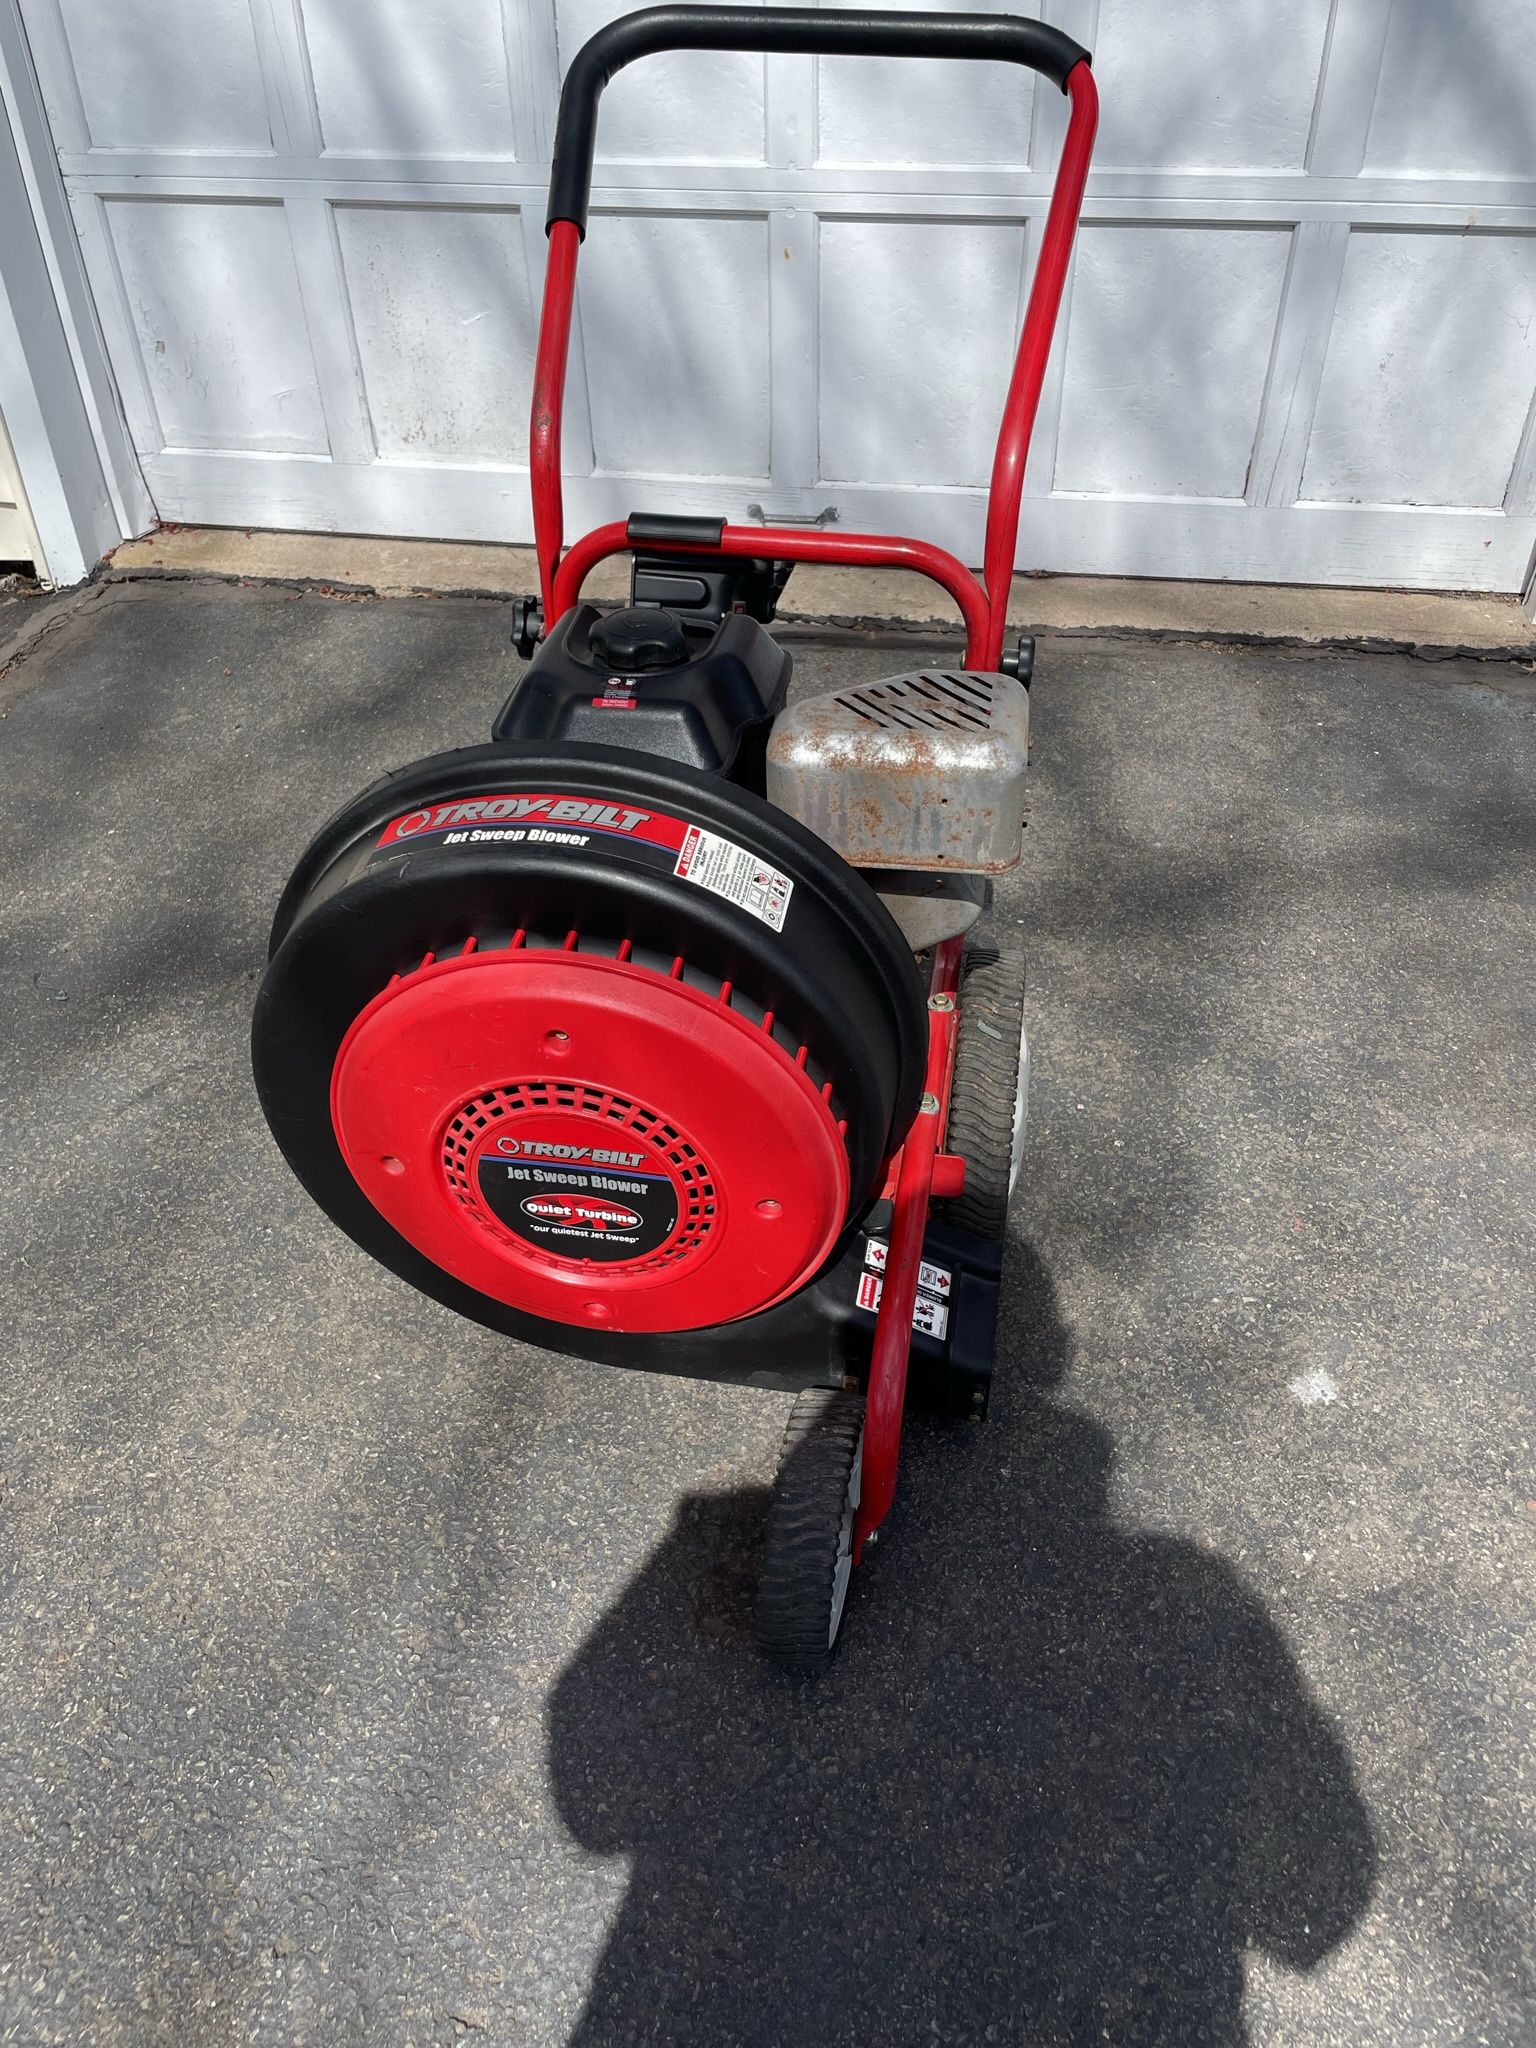 Troy Bilt Jet Sweep walk behind leaf blower. In good condition. Includes directional 